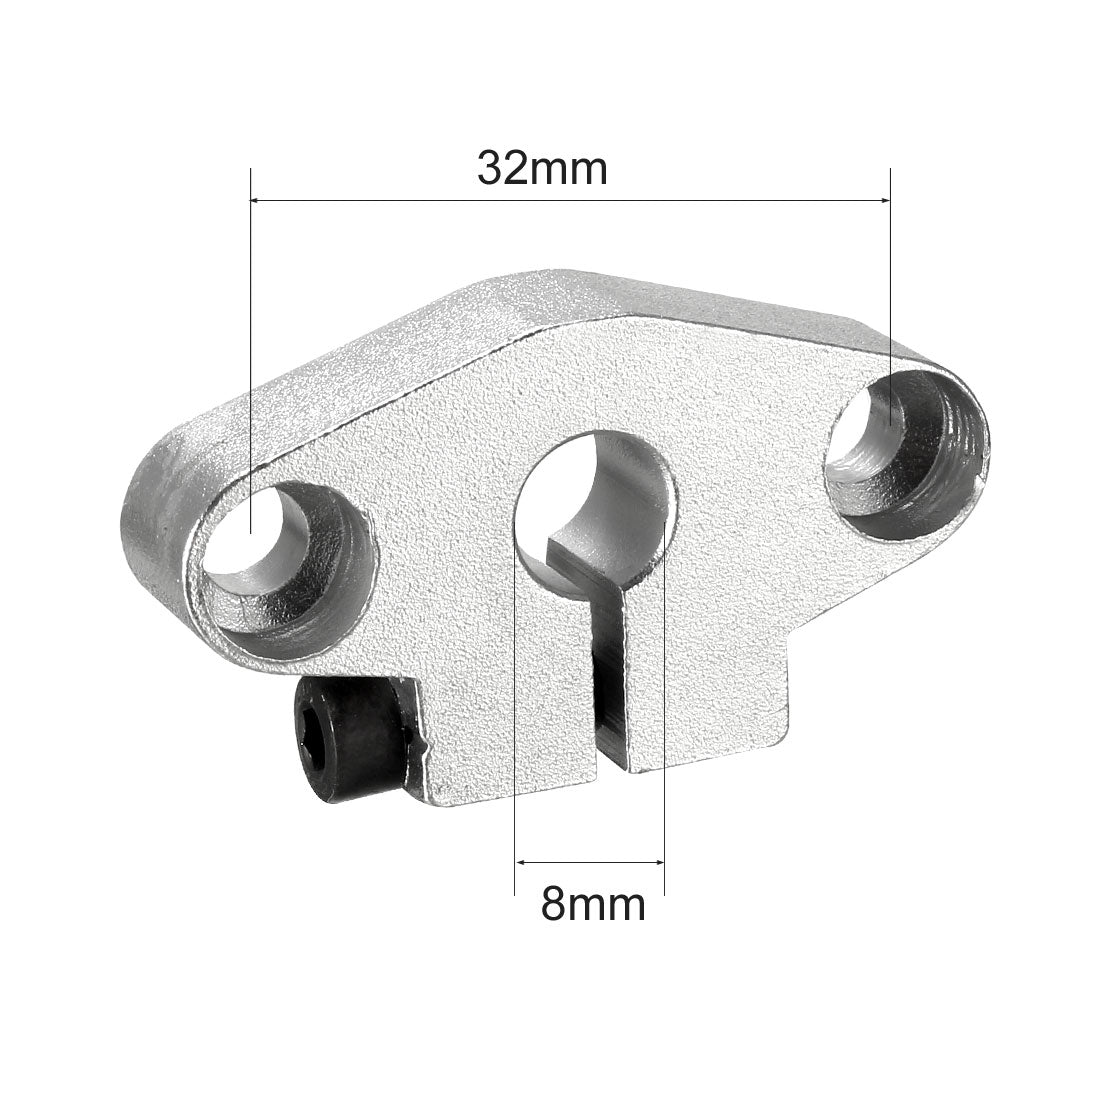 uxcell Uxcell 4PCS SHF8 Linear Motion Rail Clamping Rod Rail Guide Support for 8mm Dia Shaft